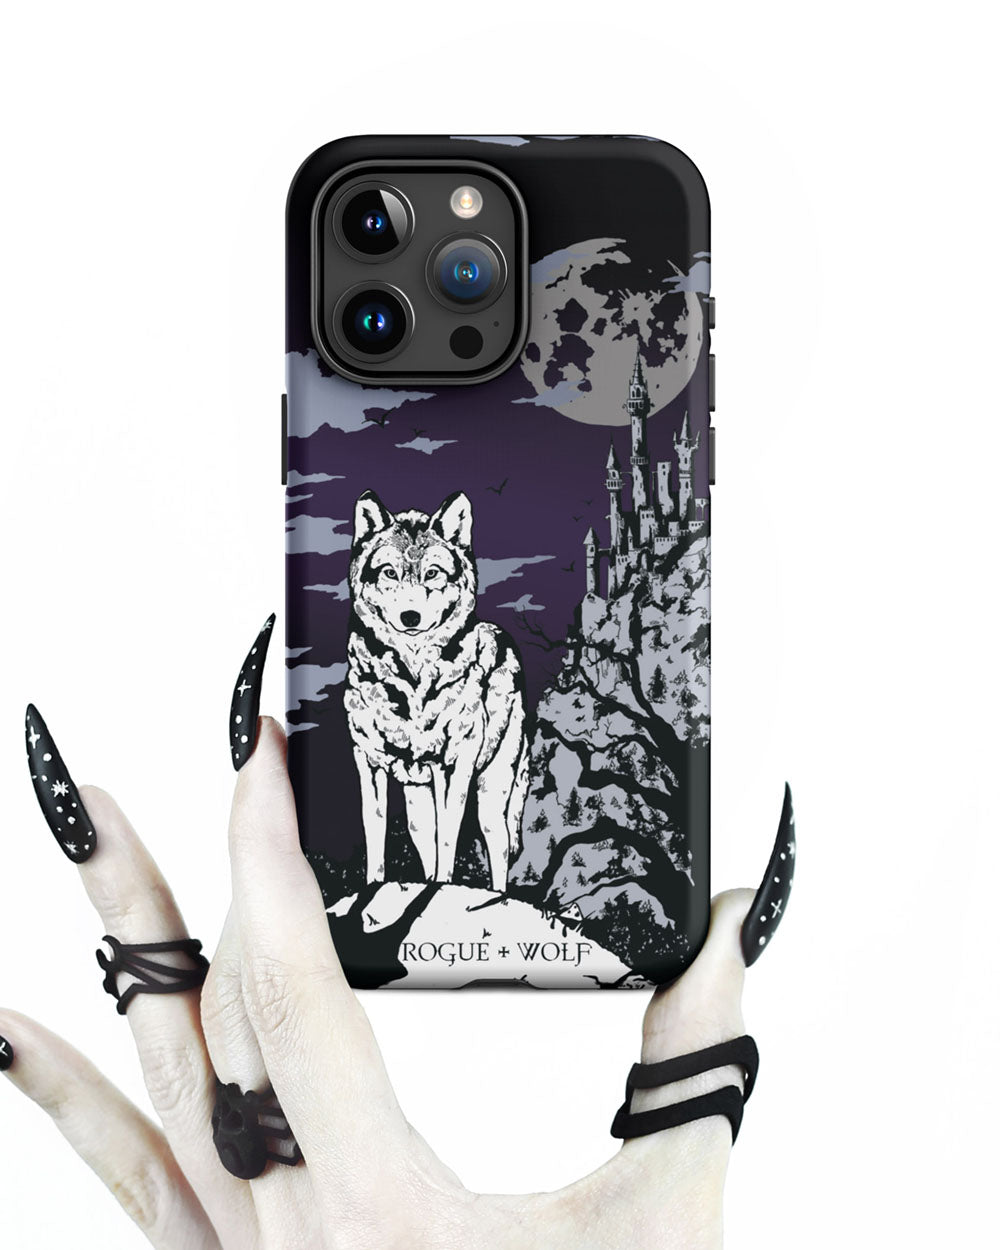 Castle Whitewolf Tough Phone Case for iPhone - Shockproof Anti-scratch Goth Witchy Phone Cover